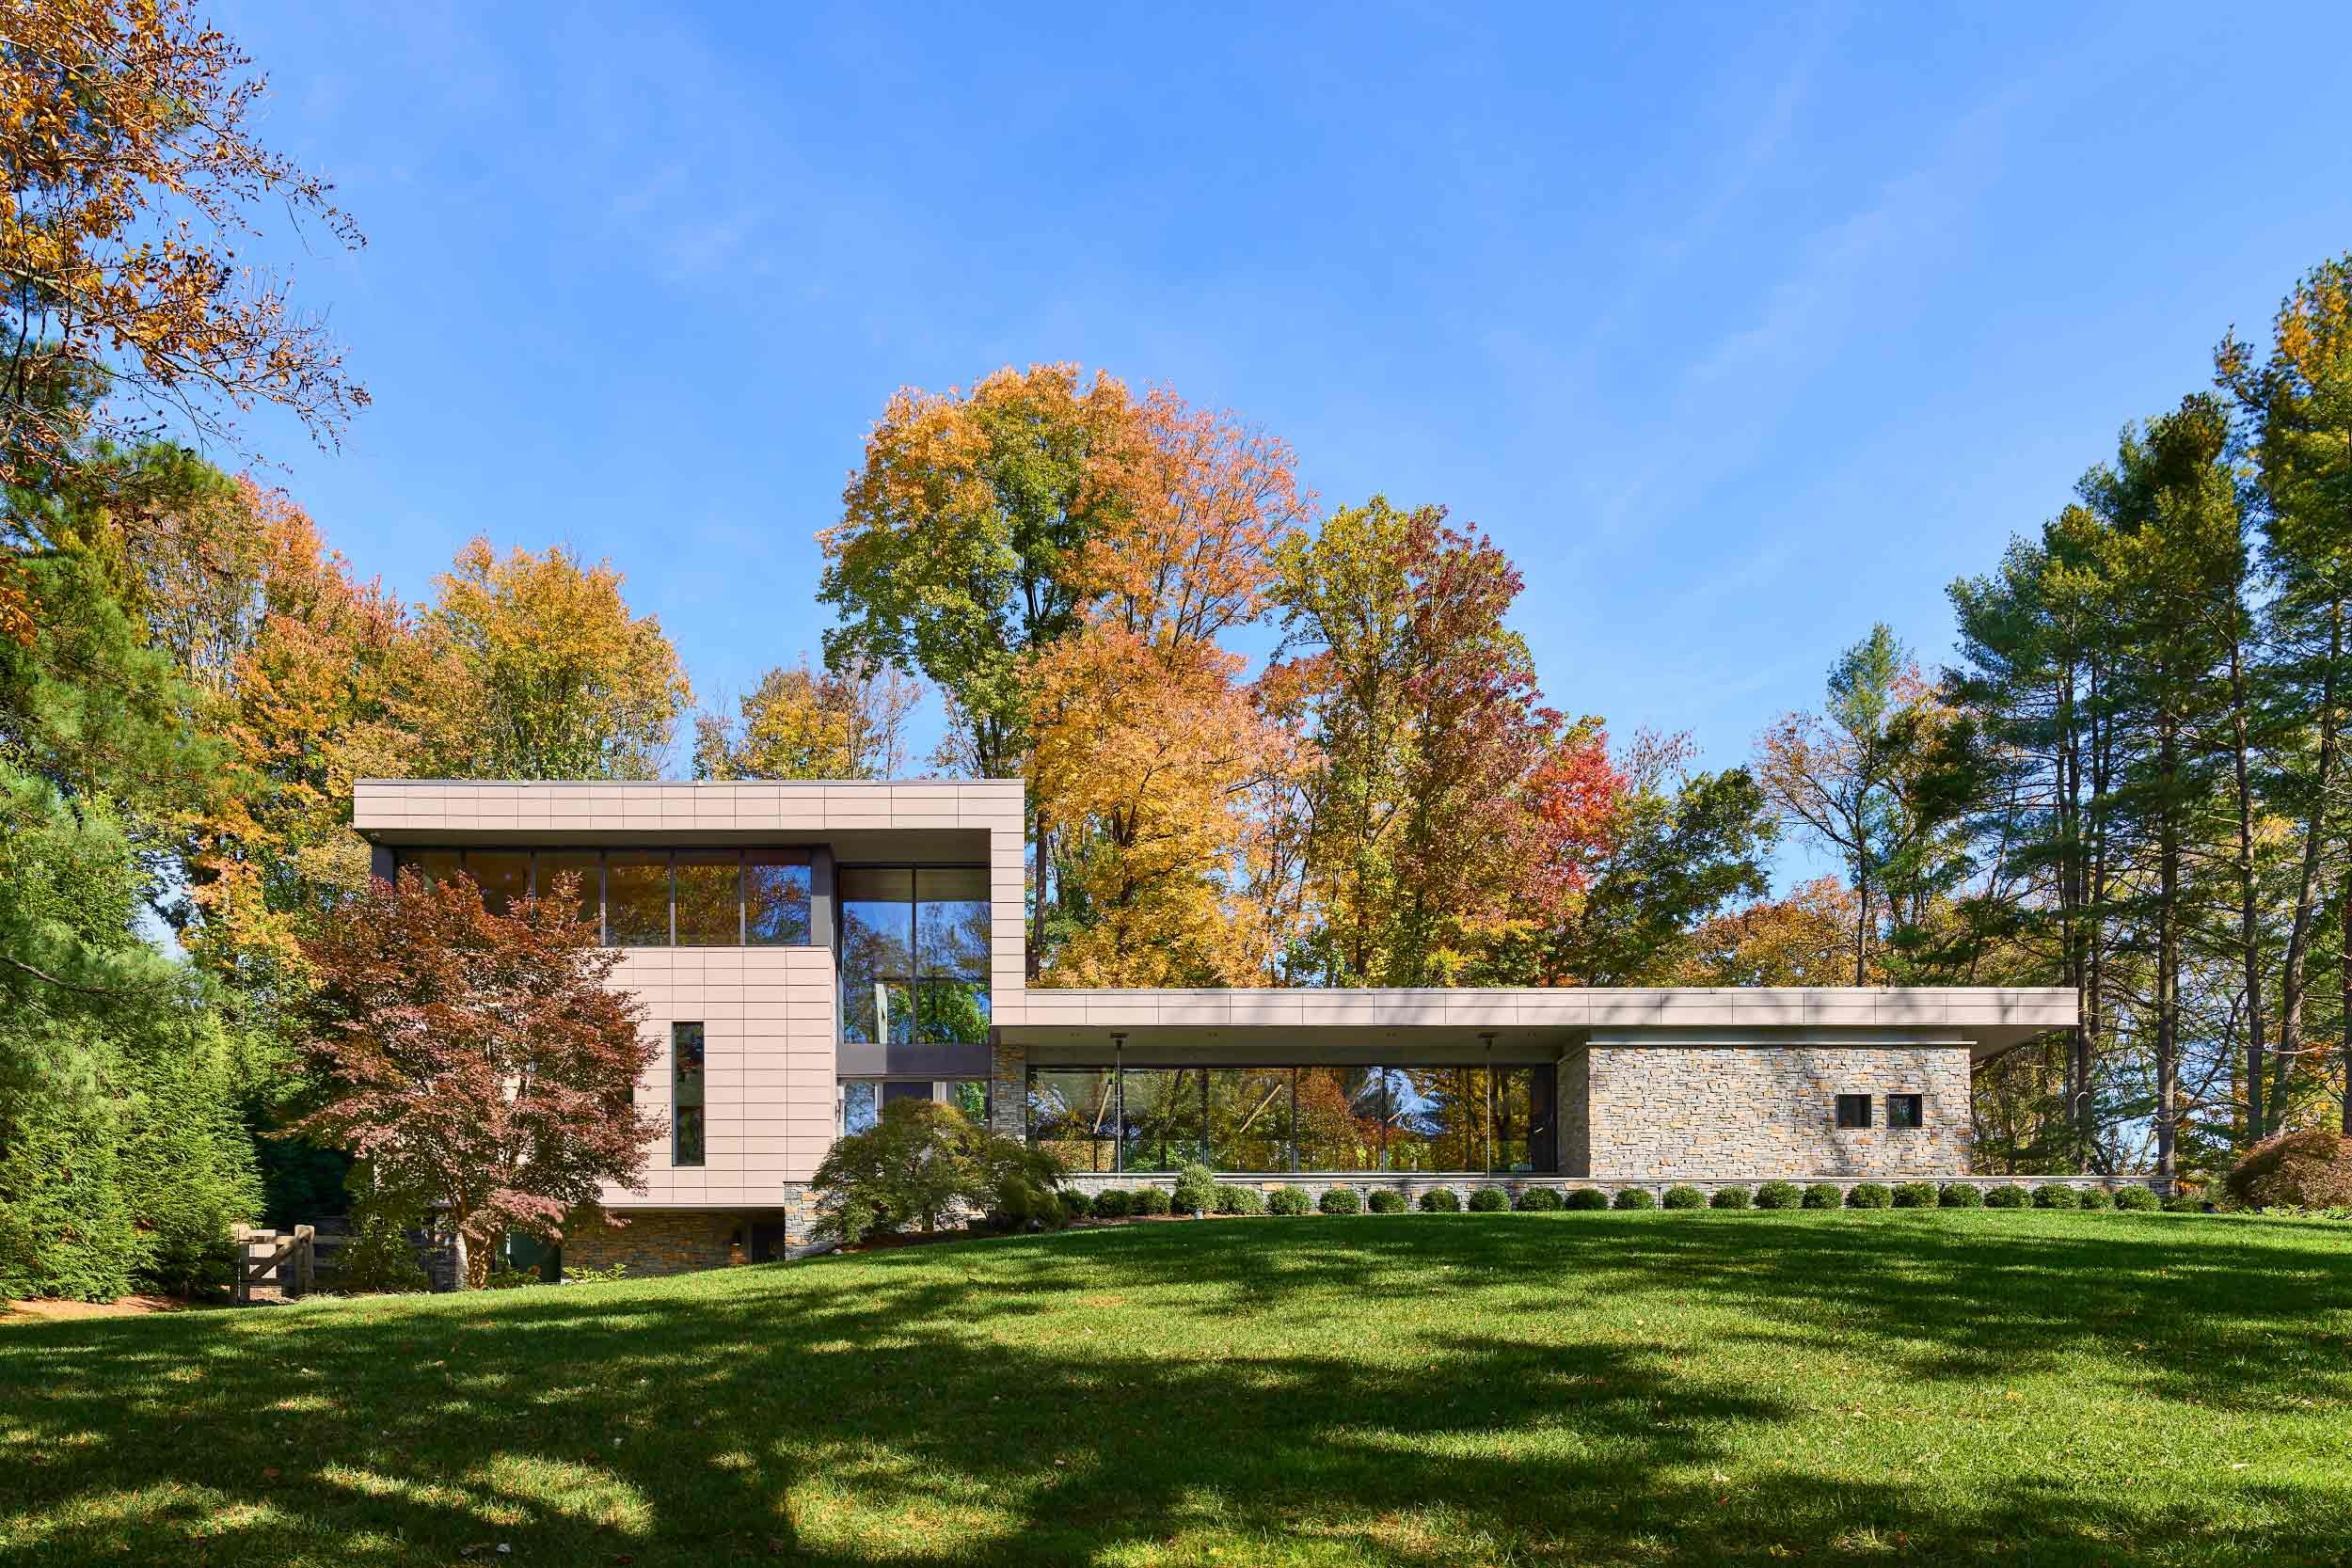  Private Residence Bryn Mawr, PA McGranaghan Architecture 